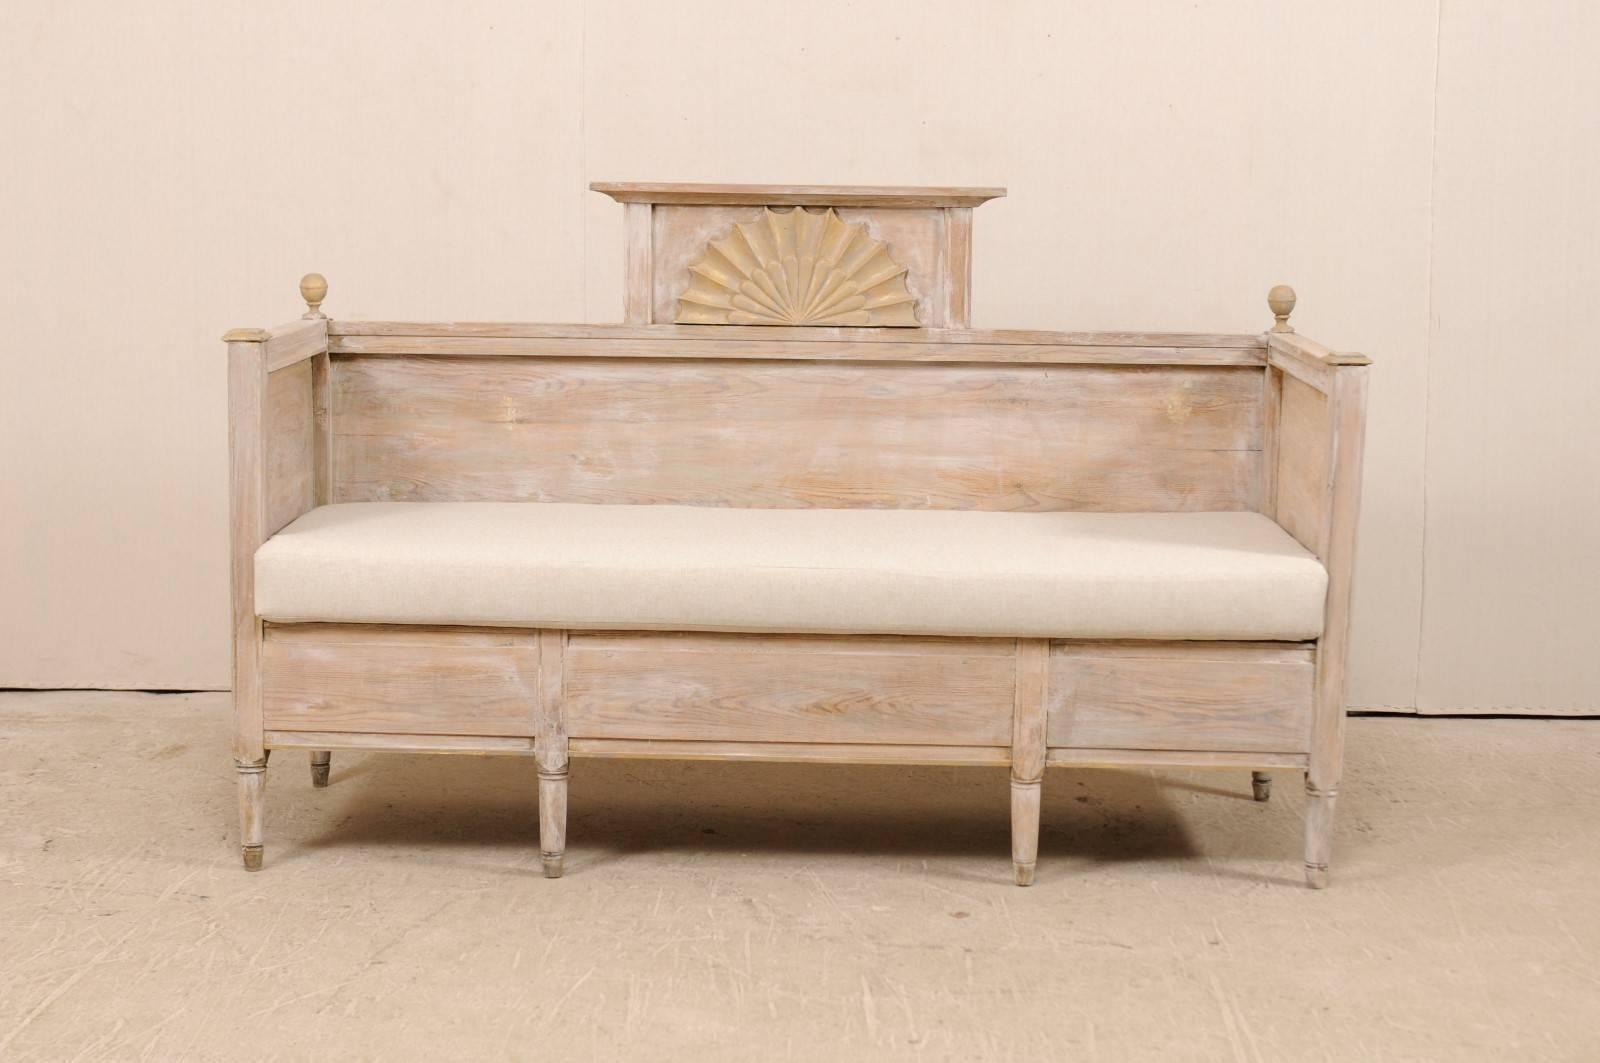 An early 19th century Swedish wood sofa bench. This antique Swedish wood sofa bench features a raised back pediment with a carved fan in it's centre, high arms, and plain skirt. There are ball finials decorating each far side of the sofa back. This